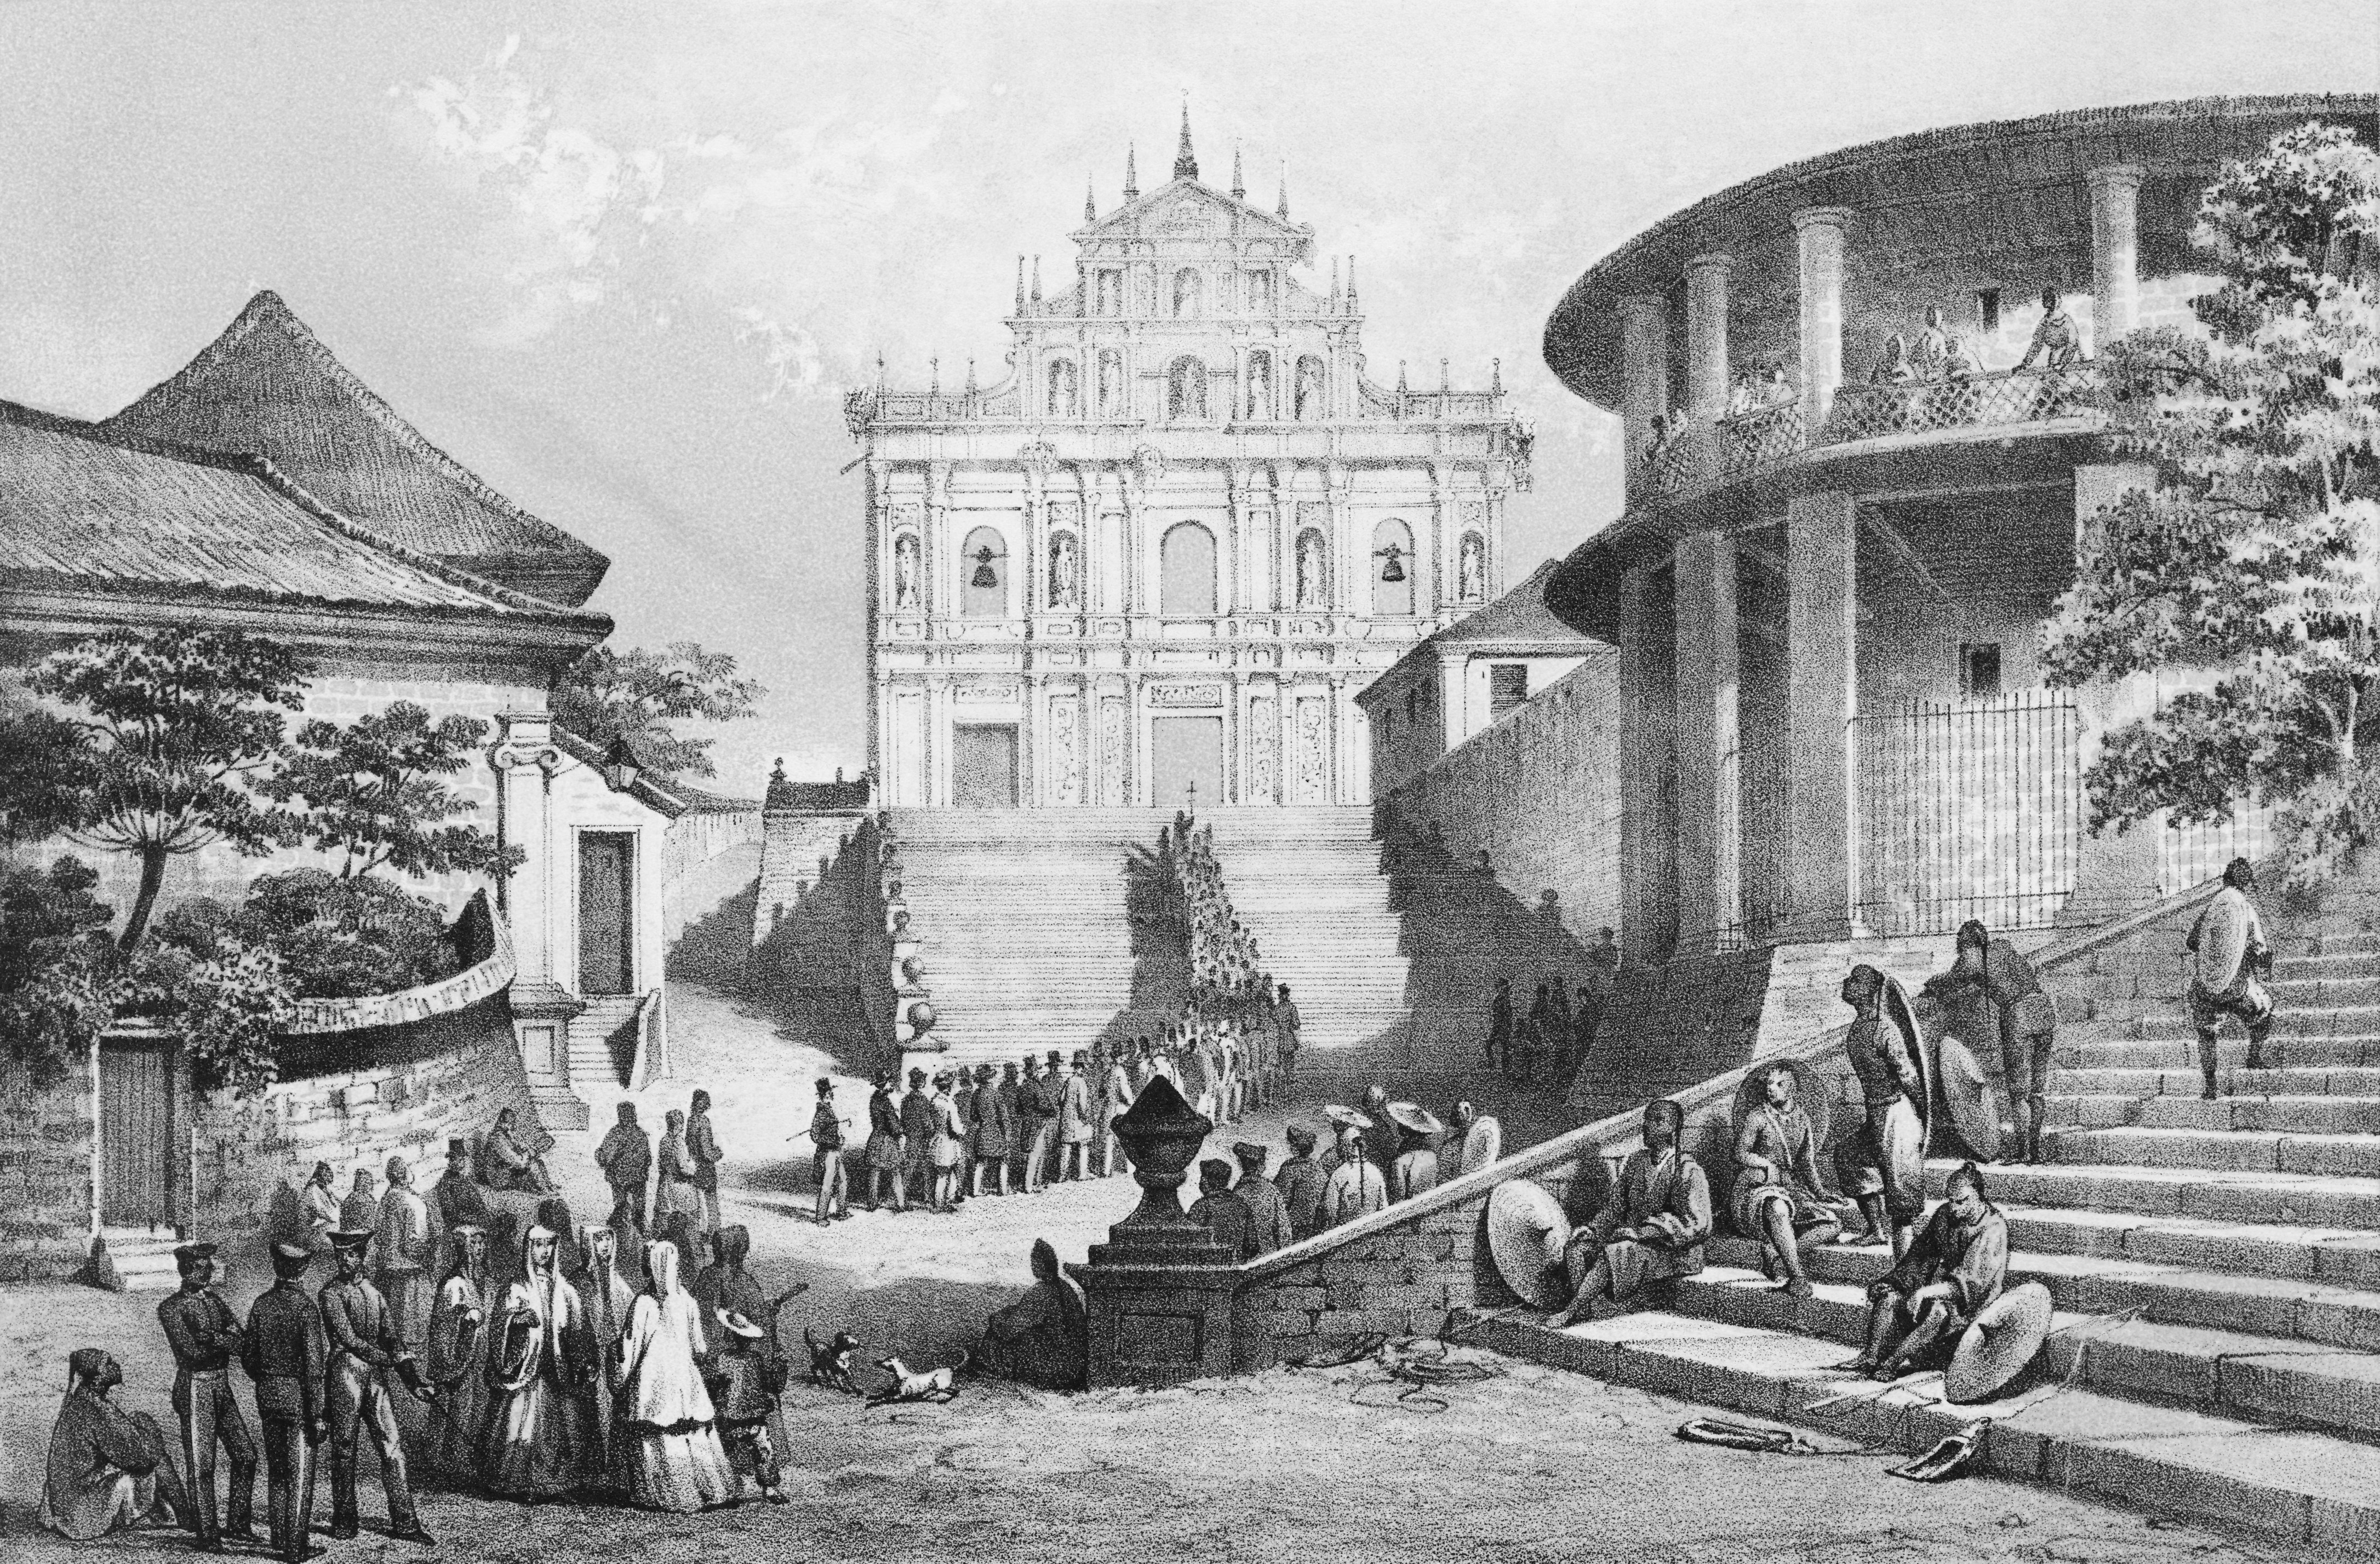 A 19th-century engraving showing worship at a Jesuit institution in Macau. Hart's novel looks at the interaction between the order and the emperor in the 1700s.